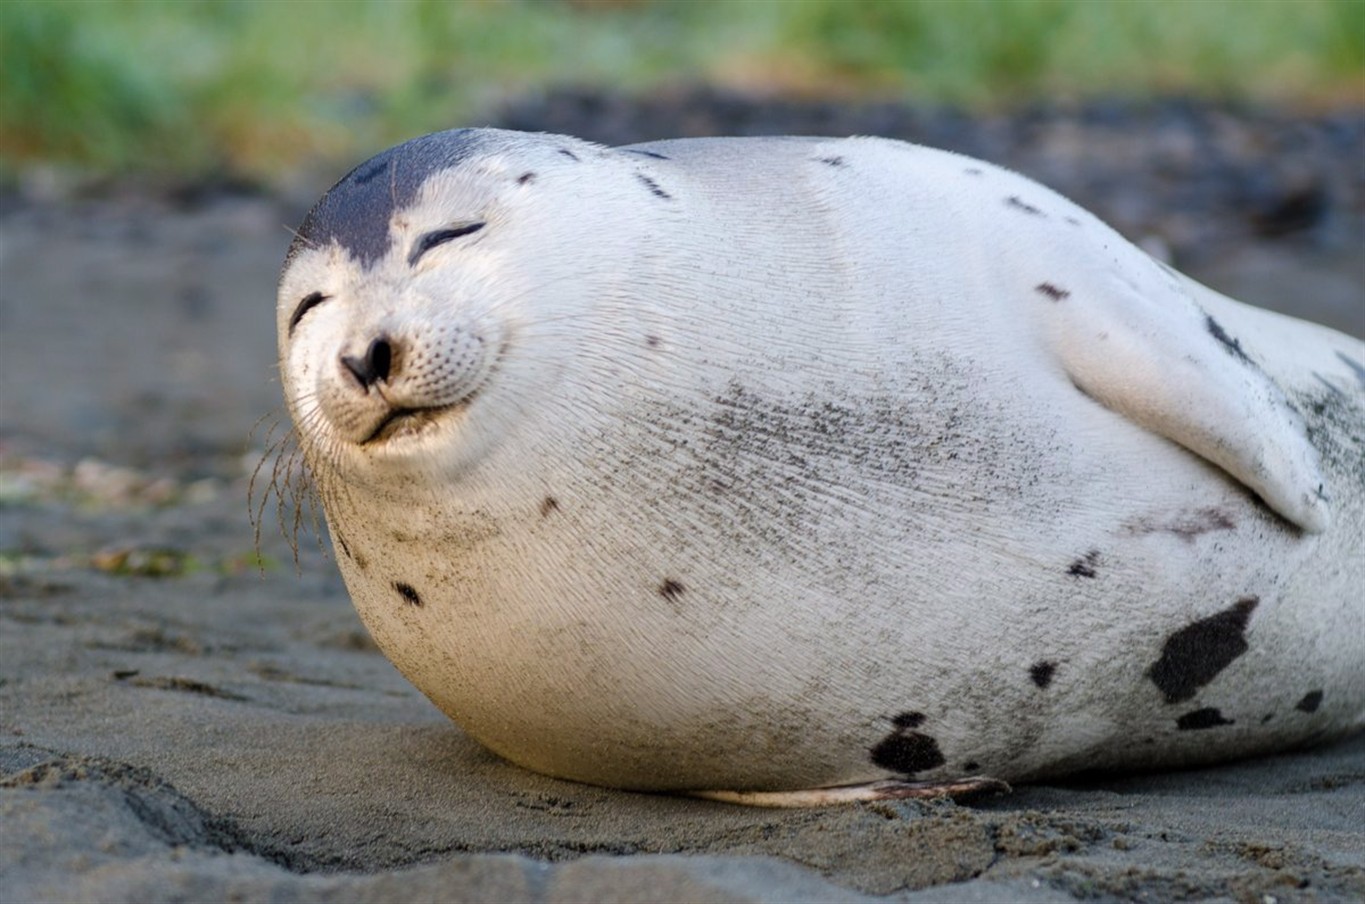 The Seal of Approval